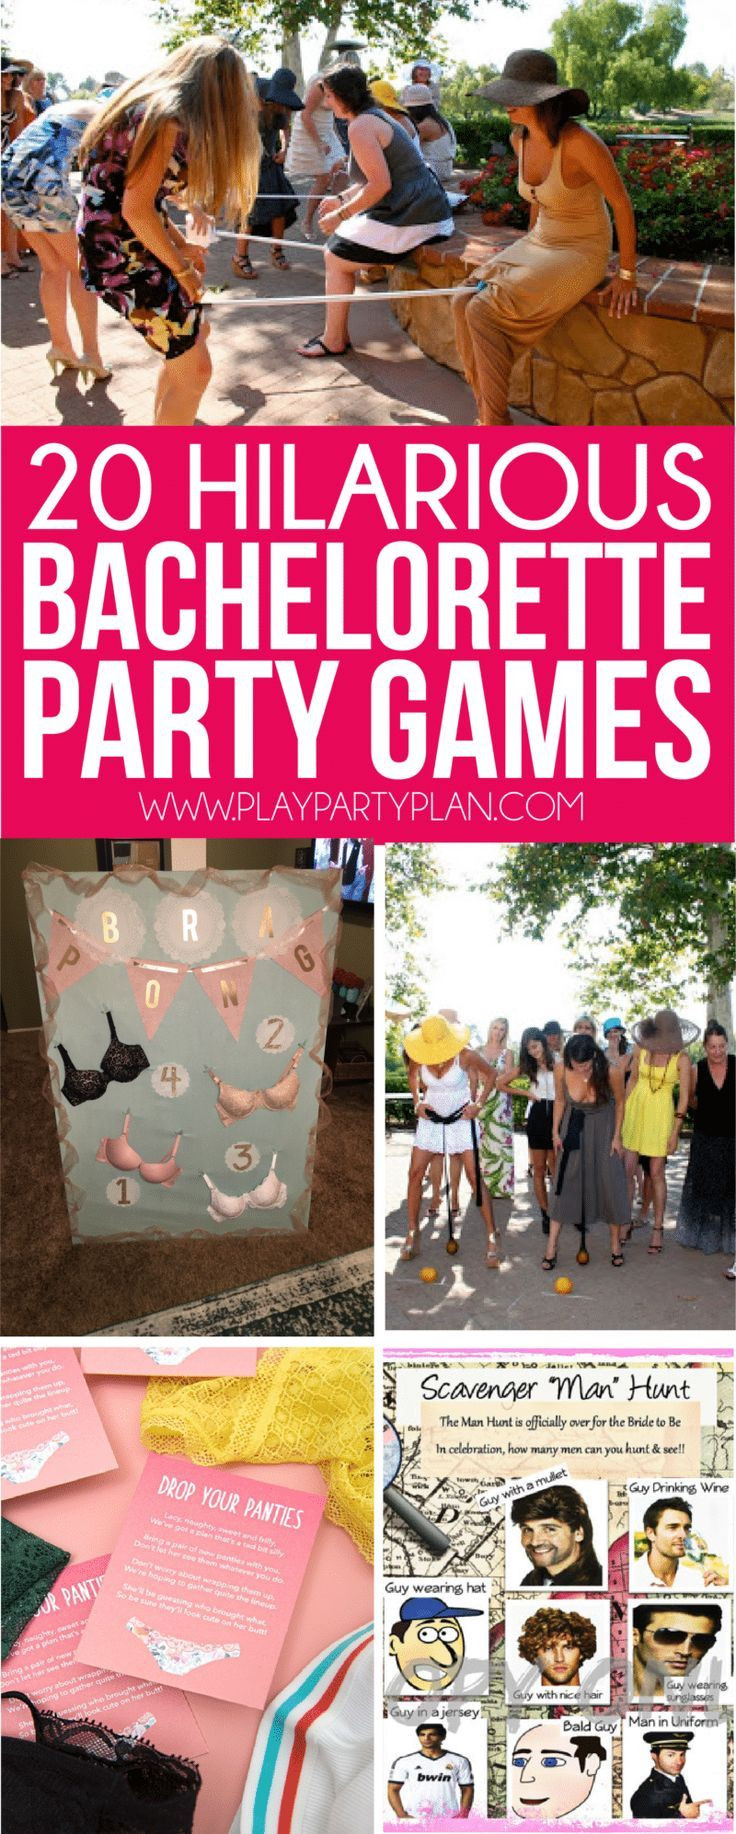 Bachelorette Party Game Ideas
 The best collection of bachelorette party games